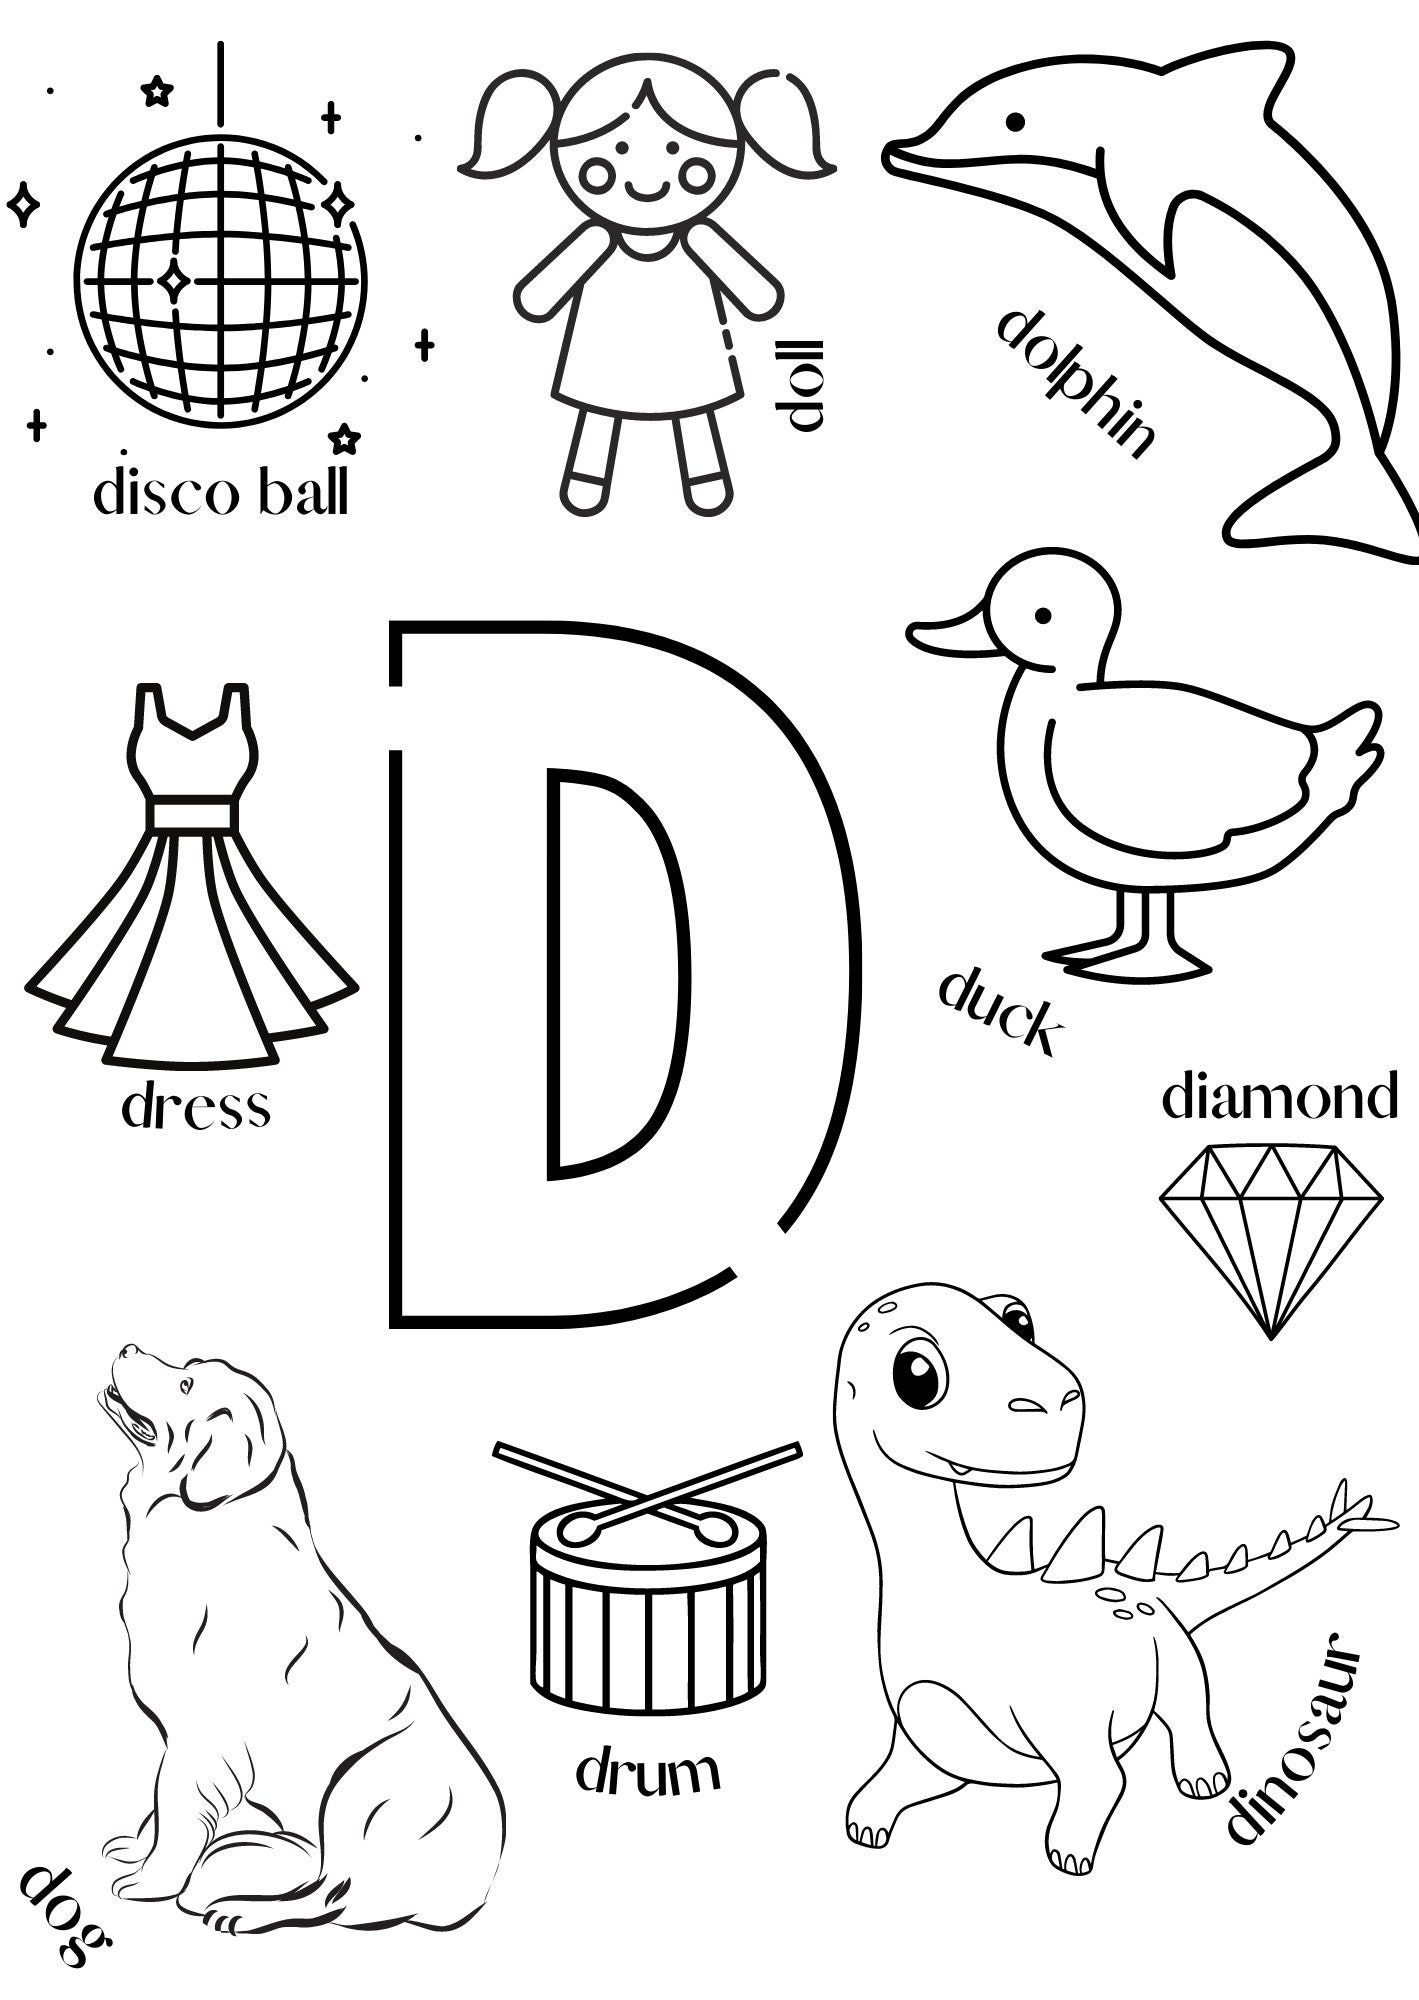 ABC Coloring Pages, Printable Alphabet Colorign Pages for Kids, 26 ...